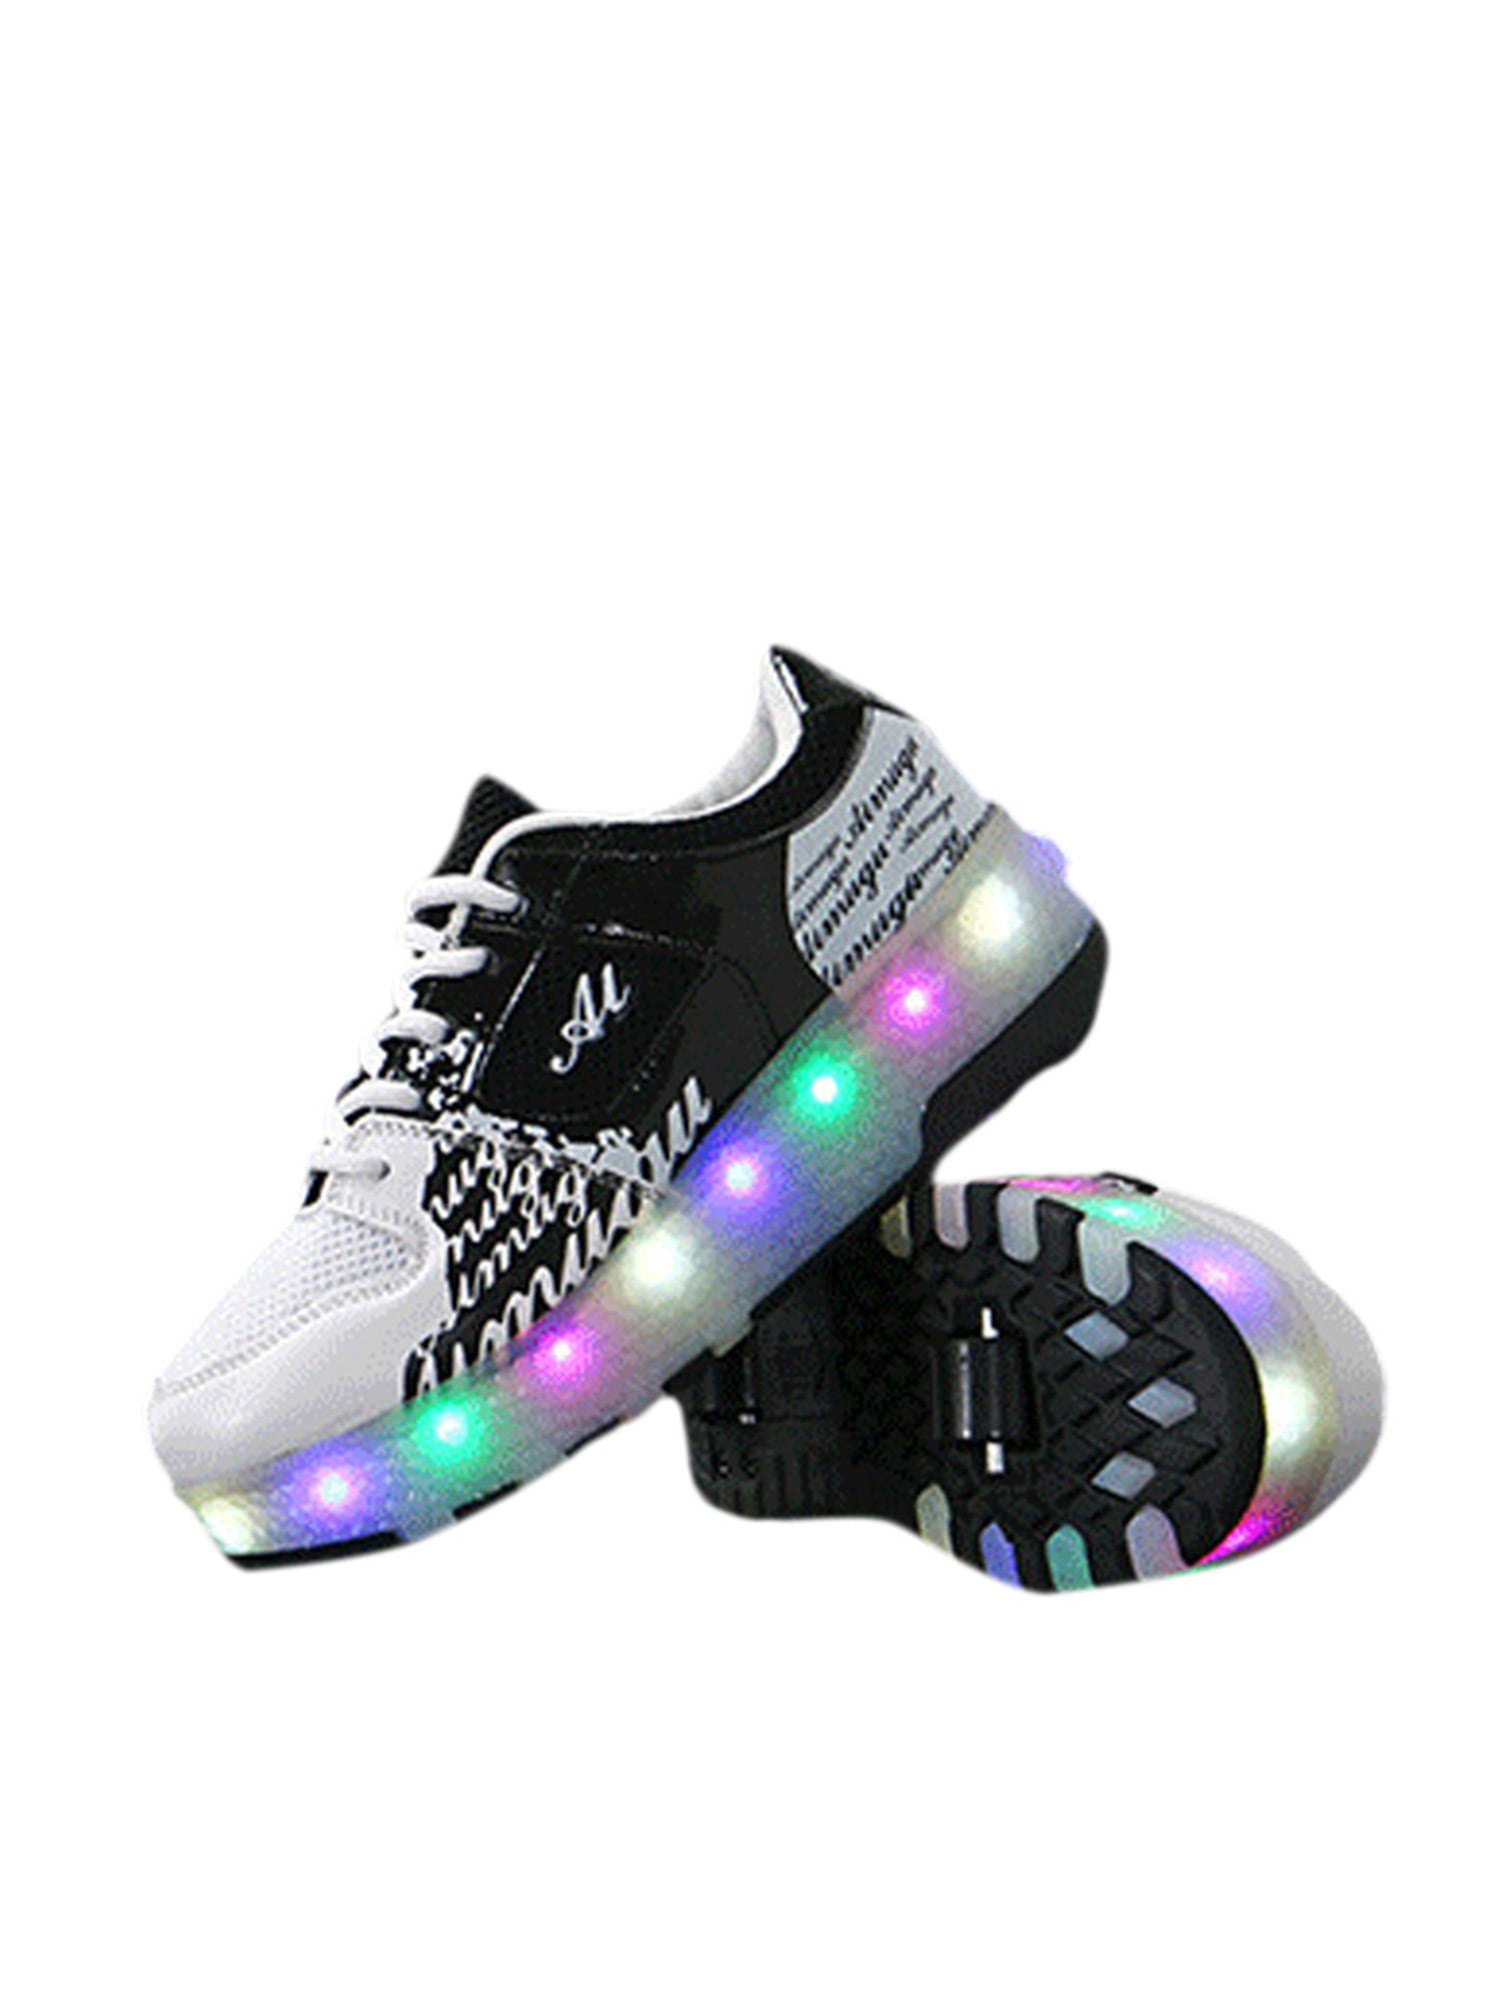 Believed Girl Boy Light Up Wheels Roller Shoes Skates Sneakers for Kid Youth Christmas 